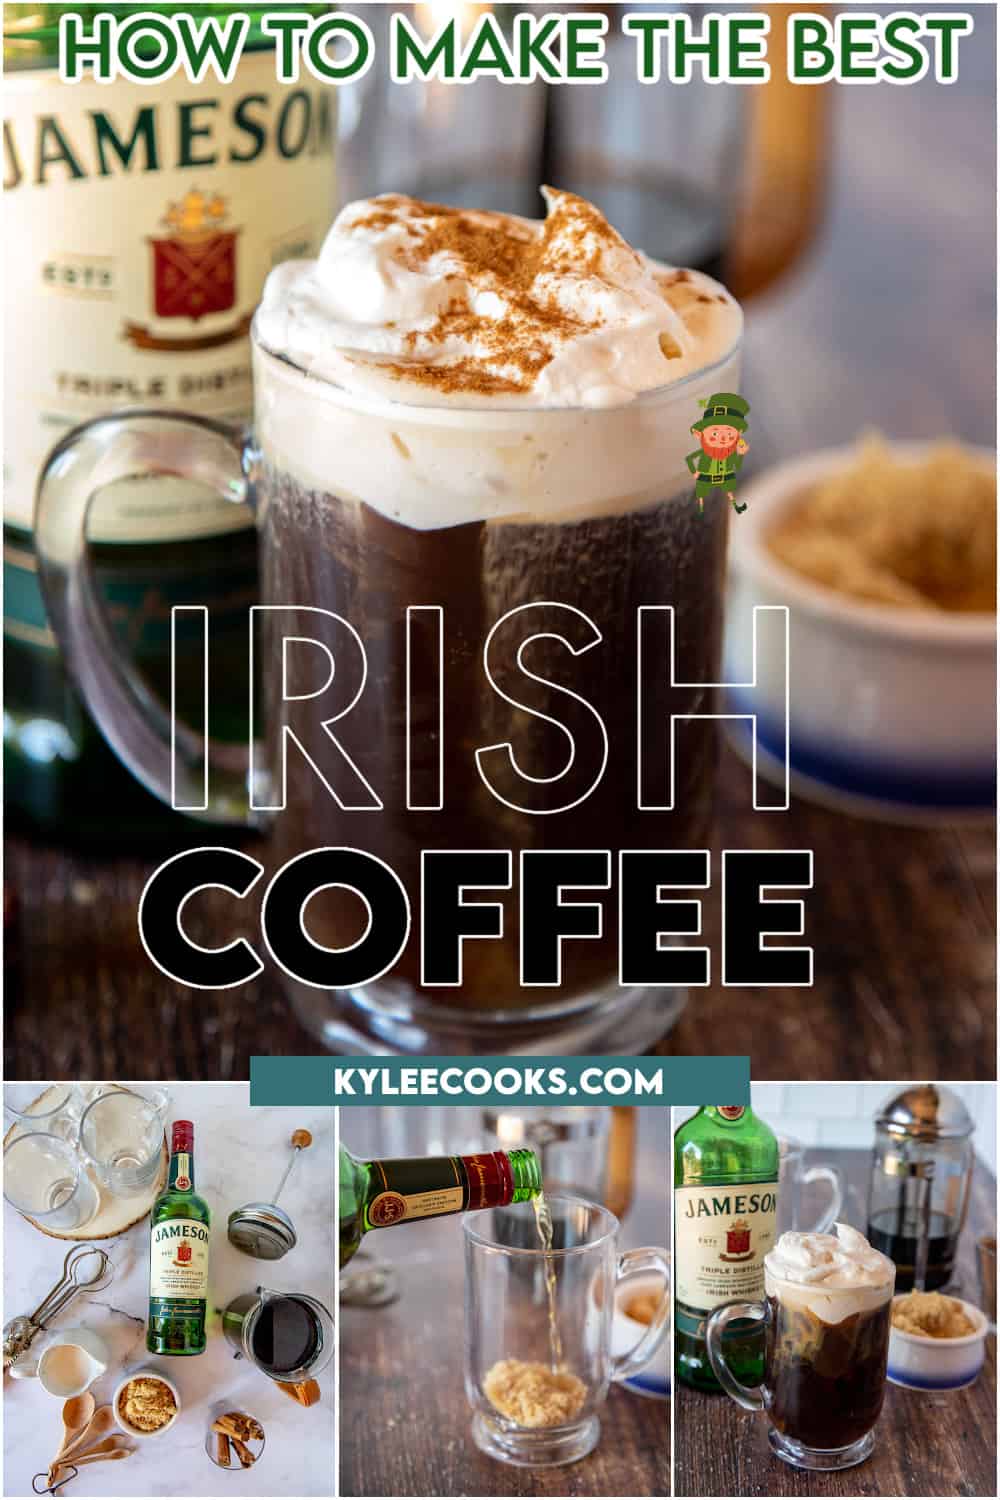 Irish coffee with a whiskey bottle, sugar and coffee in the background with text overlay.